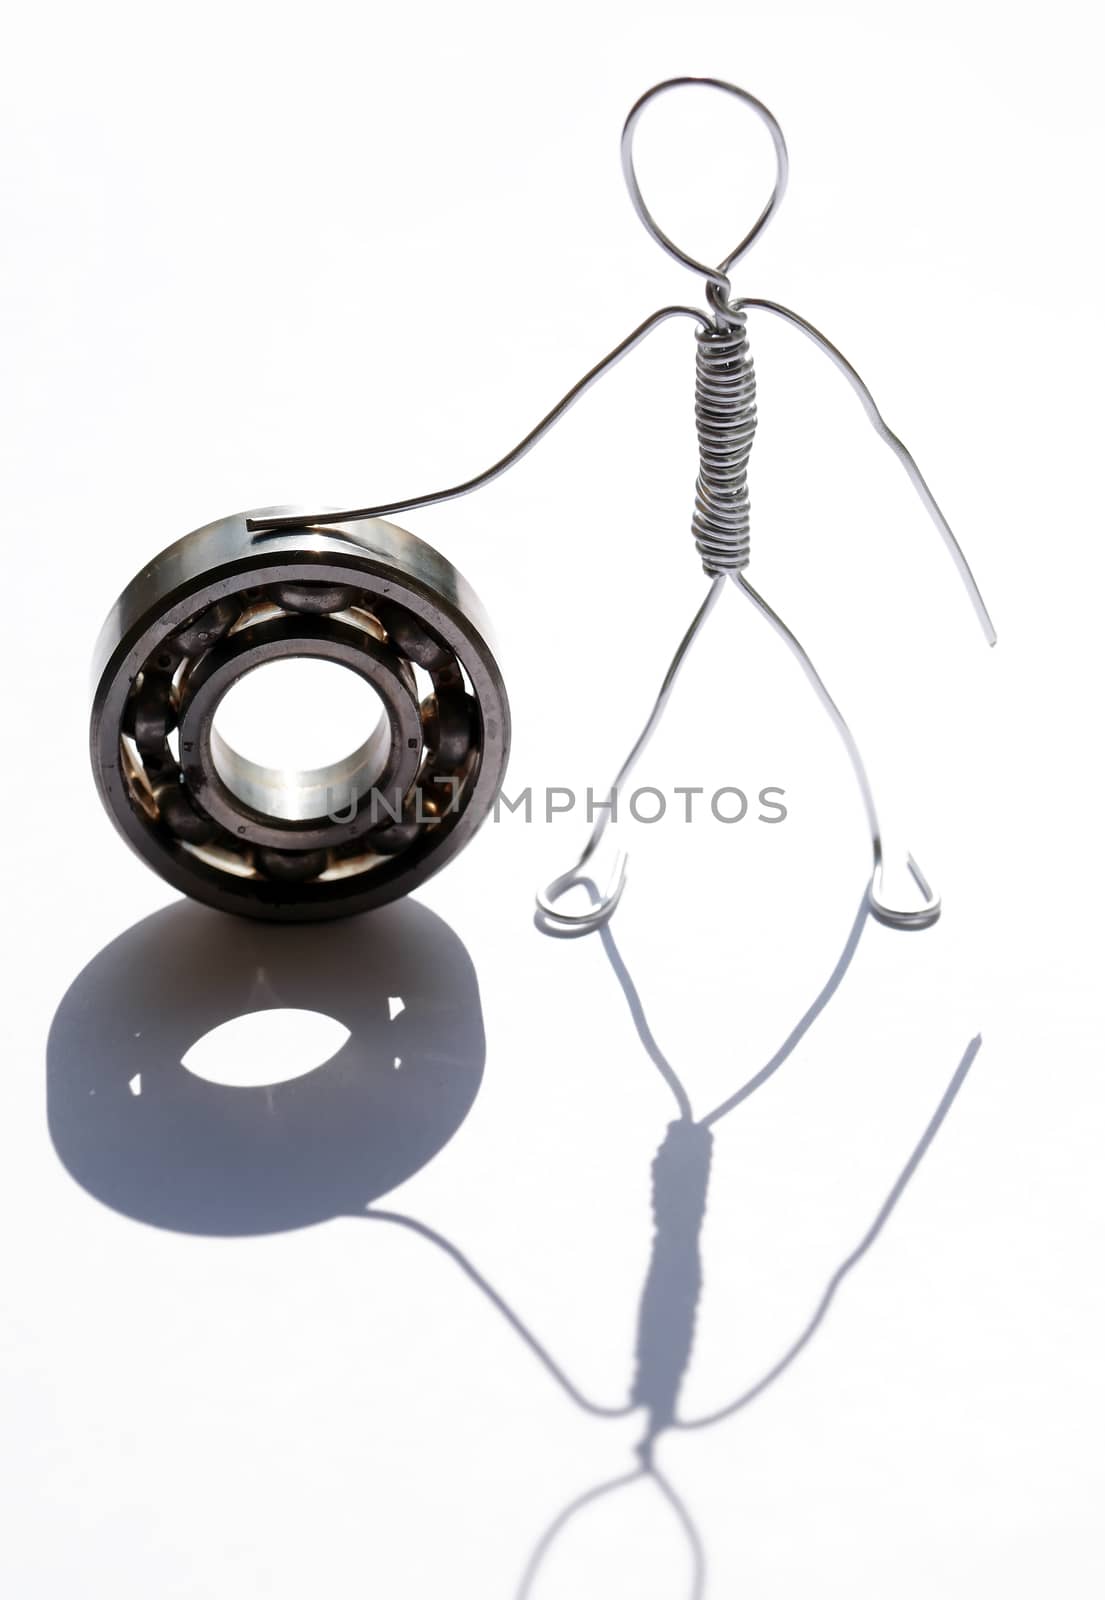 Man made from aluminum wire near ball bearing